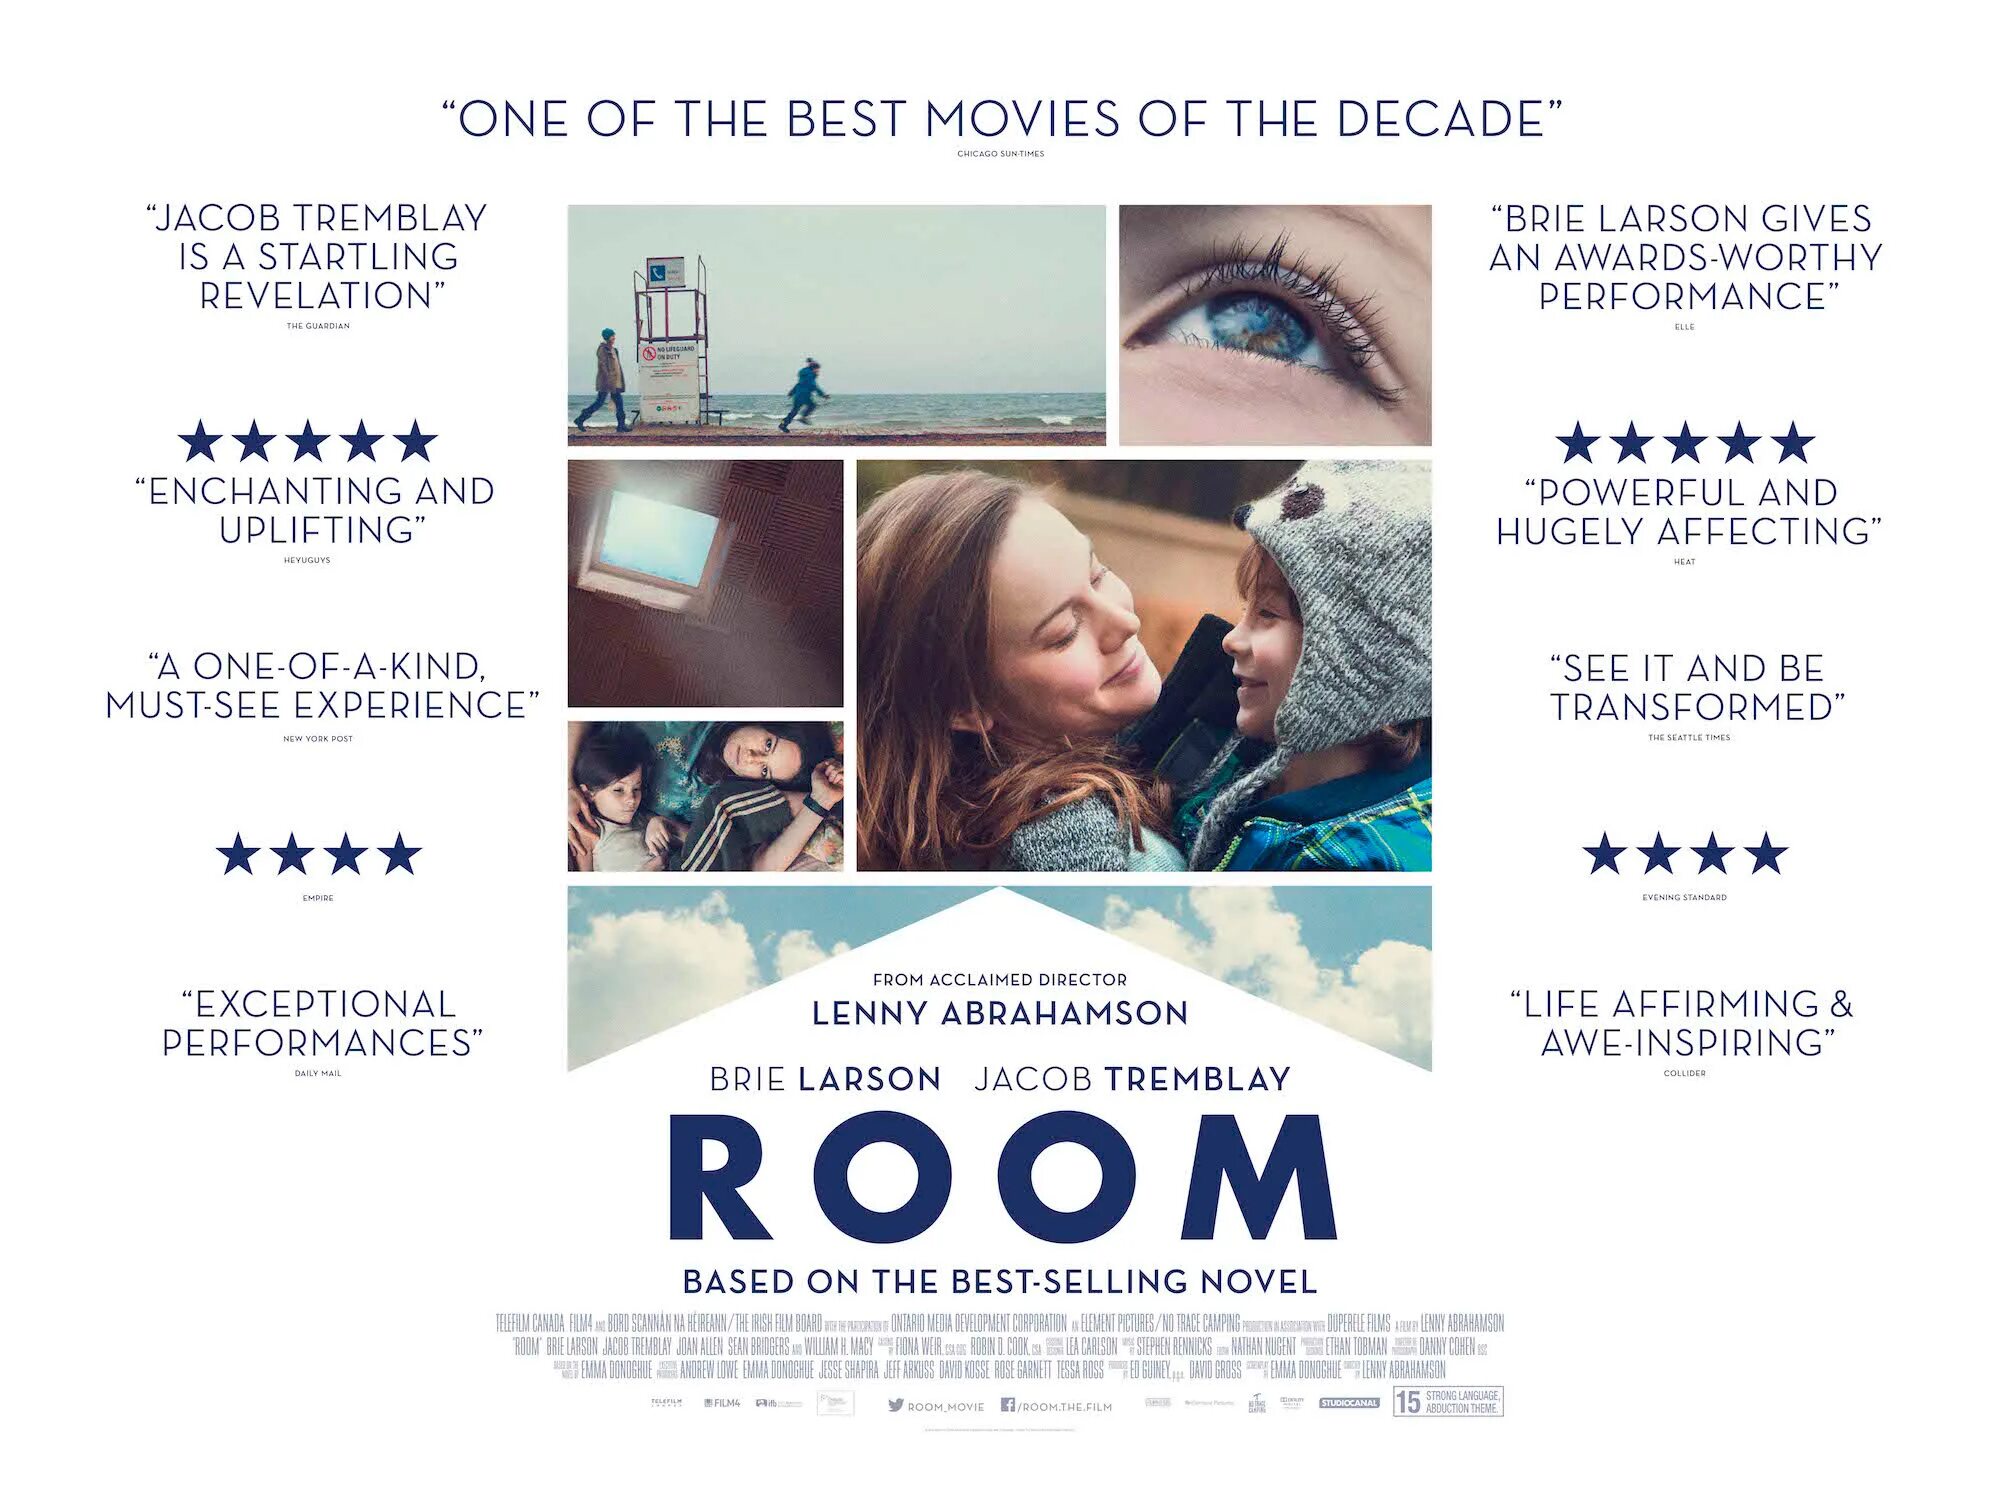 The room poster. Бри Ларсон Room 2015. Комната / Room (2015).